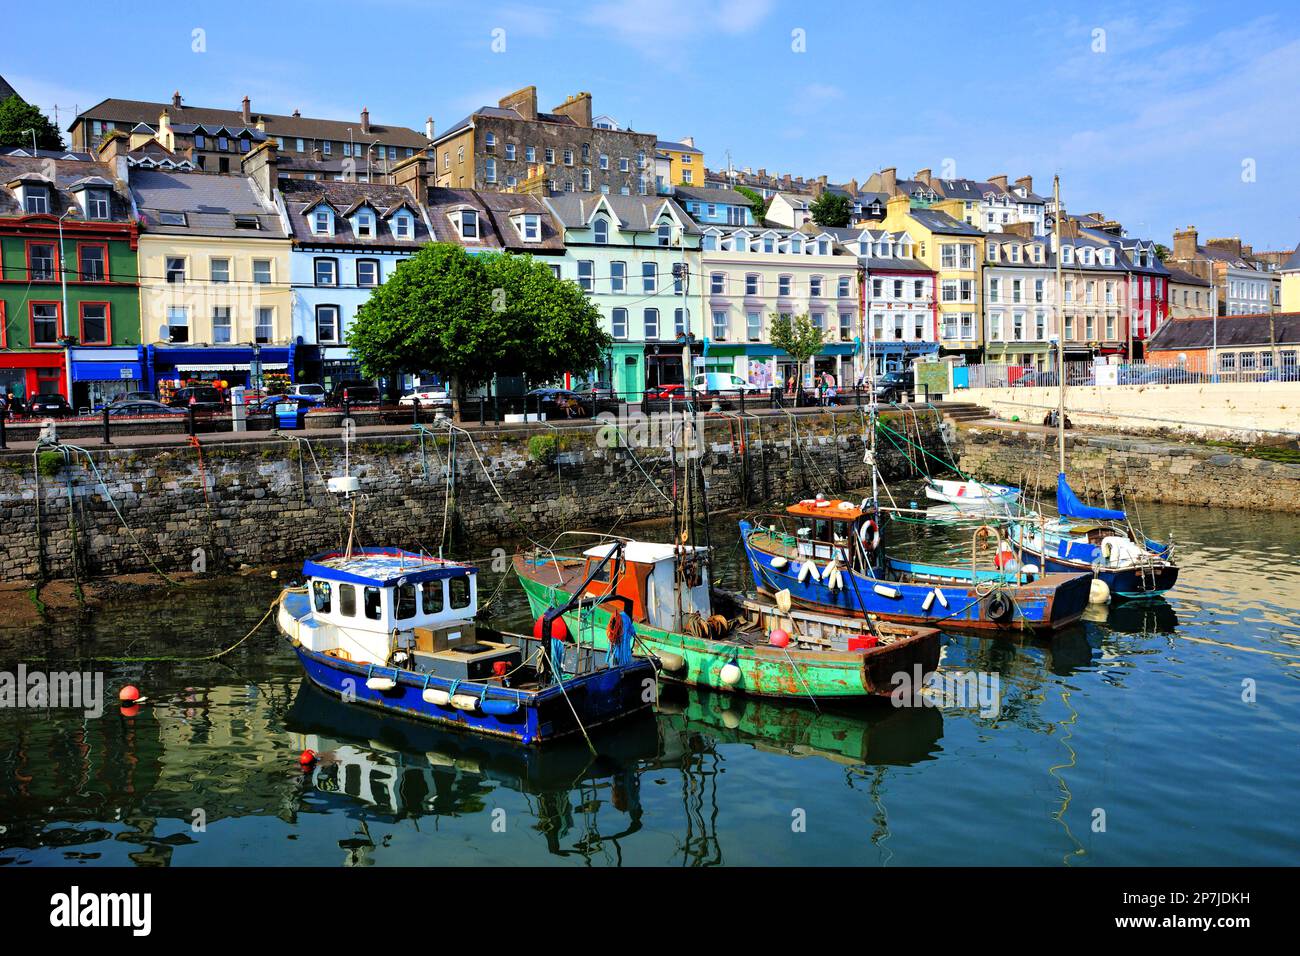 Old boats with colorful harbor buildings in background in the port town of Cobh, County Cork, Ireland Stock Photo